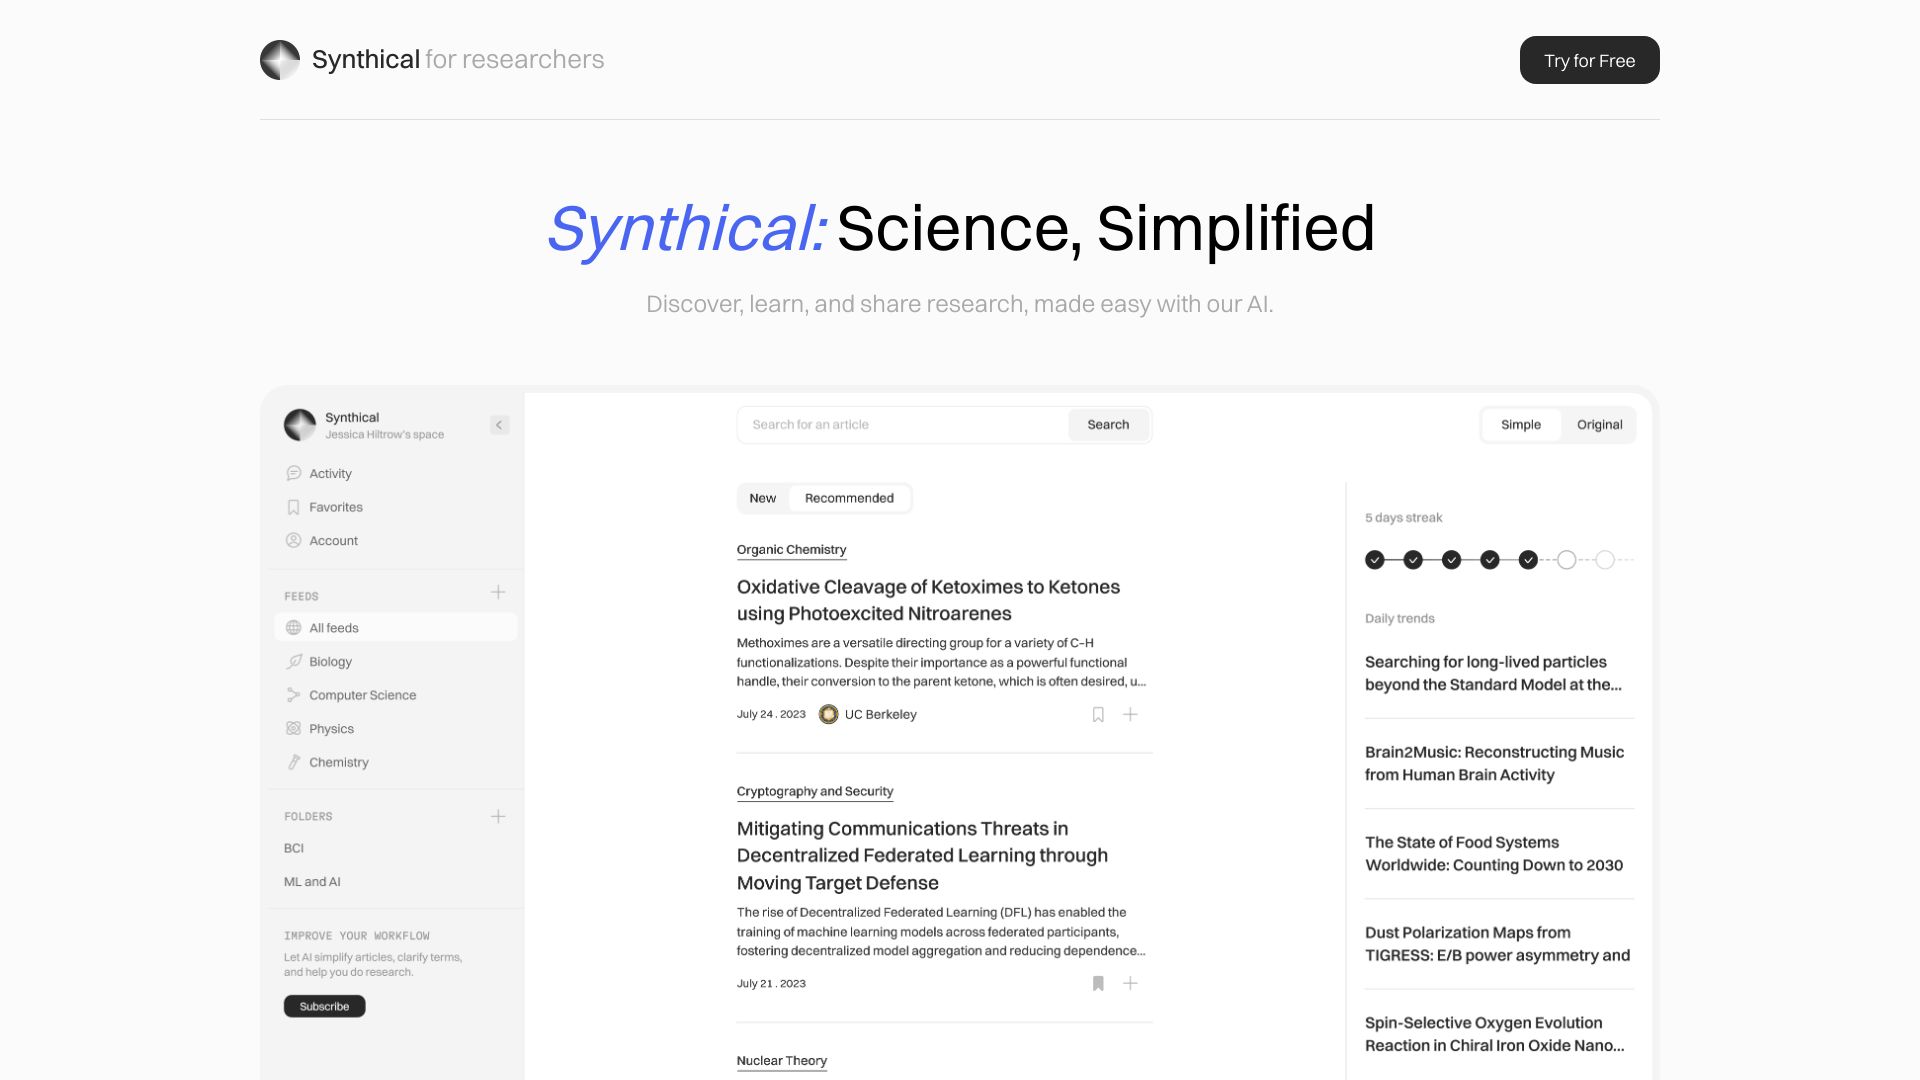 Synthical: Science, Simplified